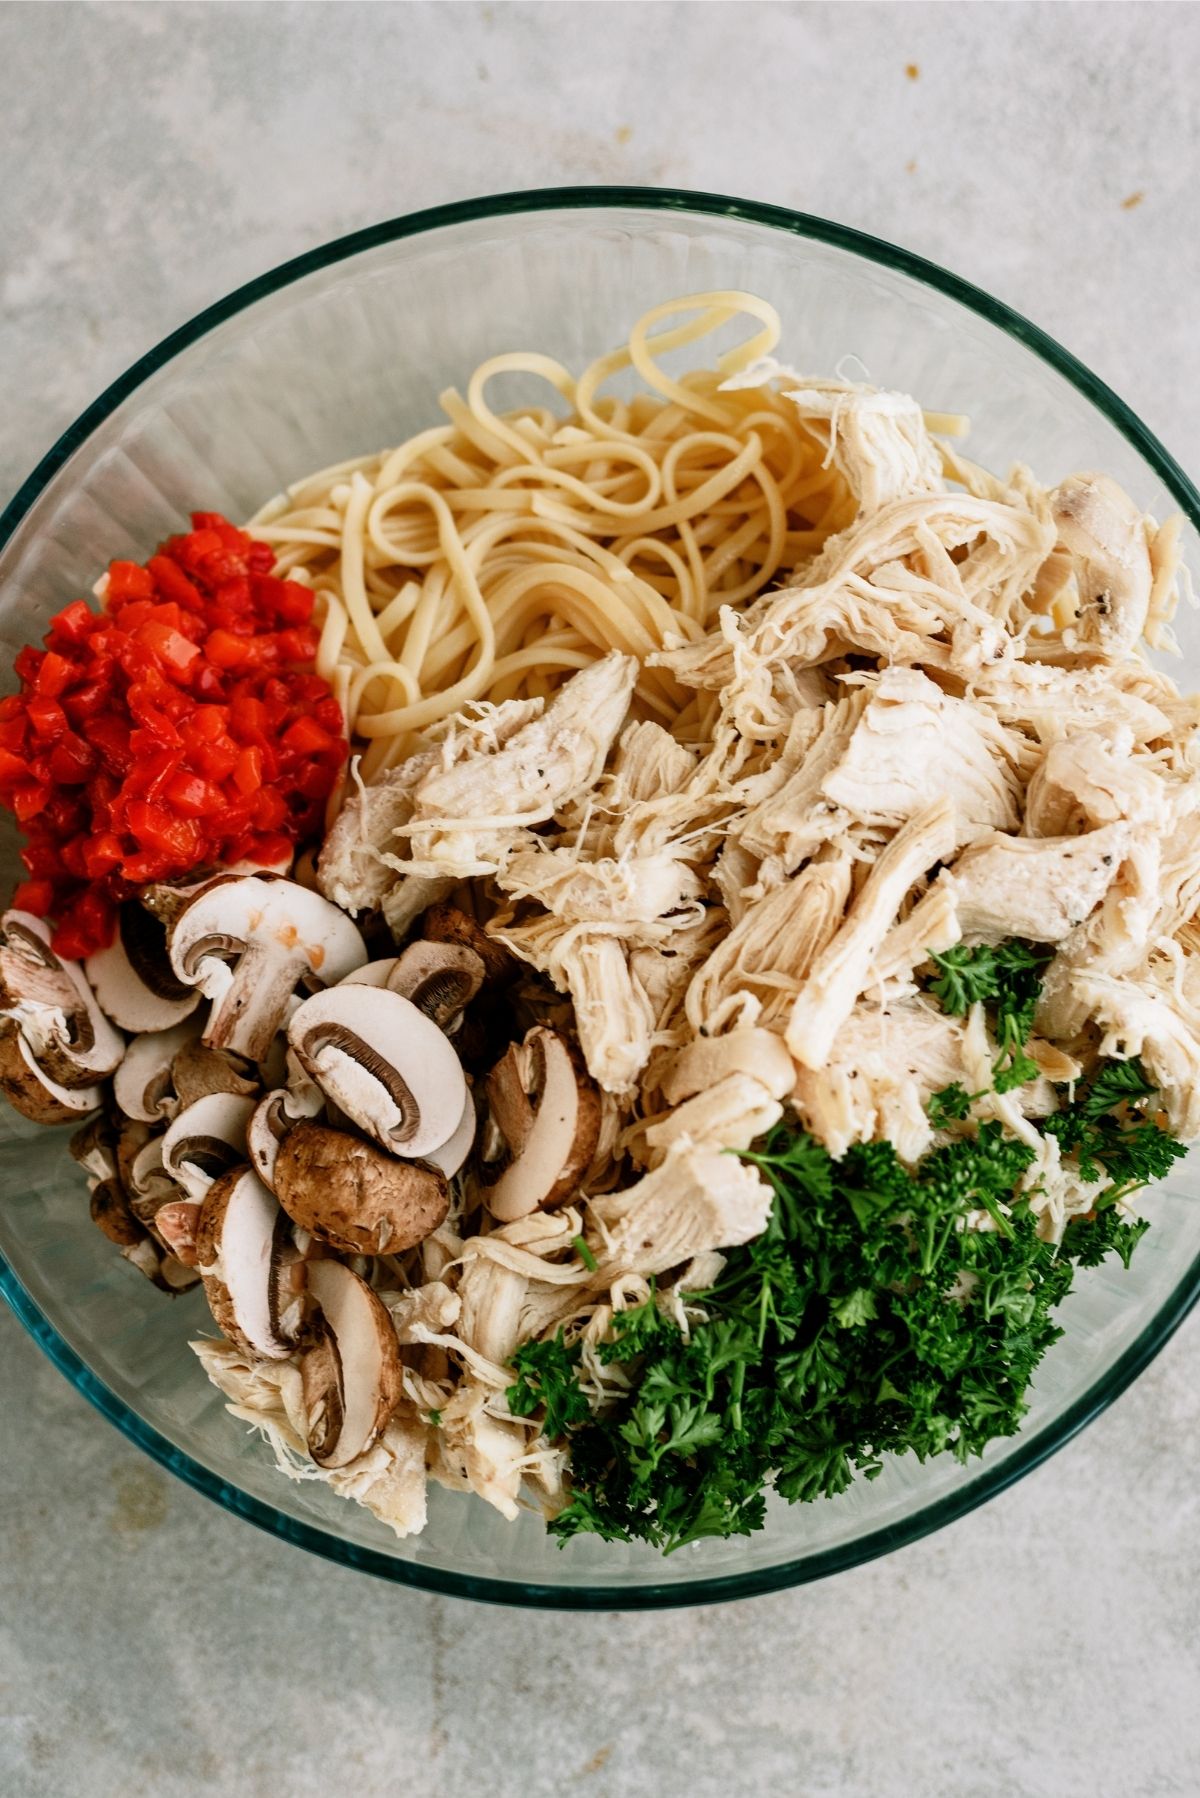 shredded chicken, vegetables and pasta in a large glass bowl